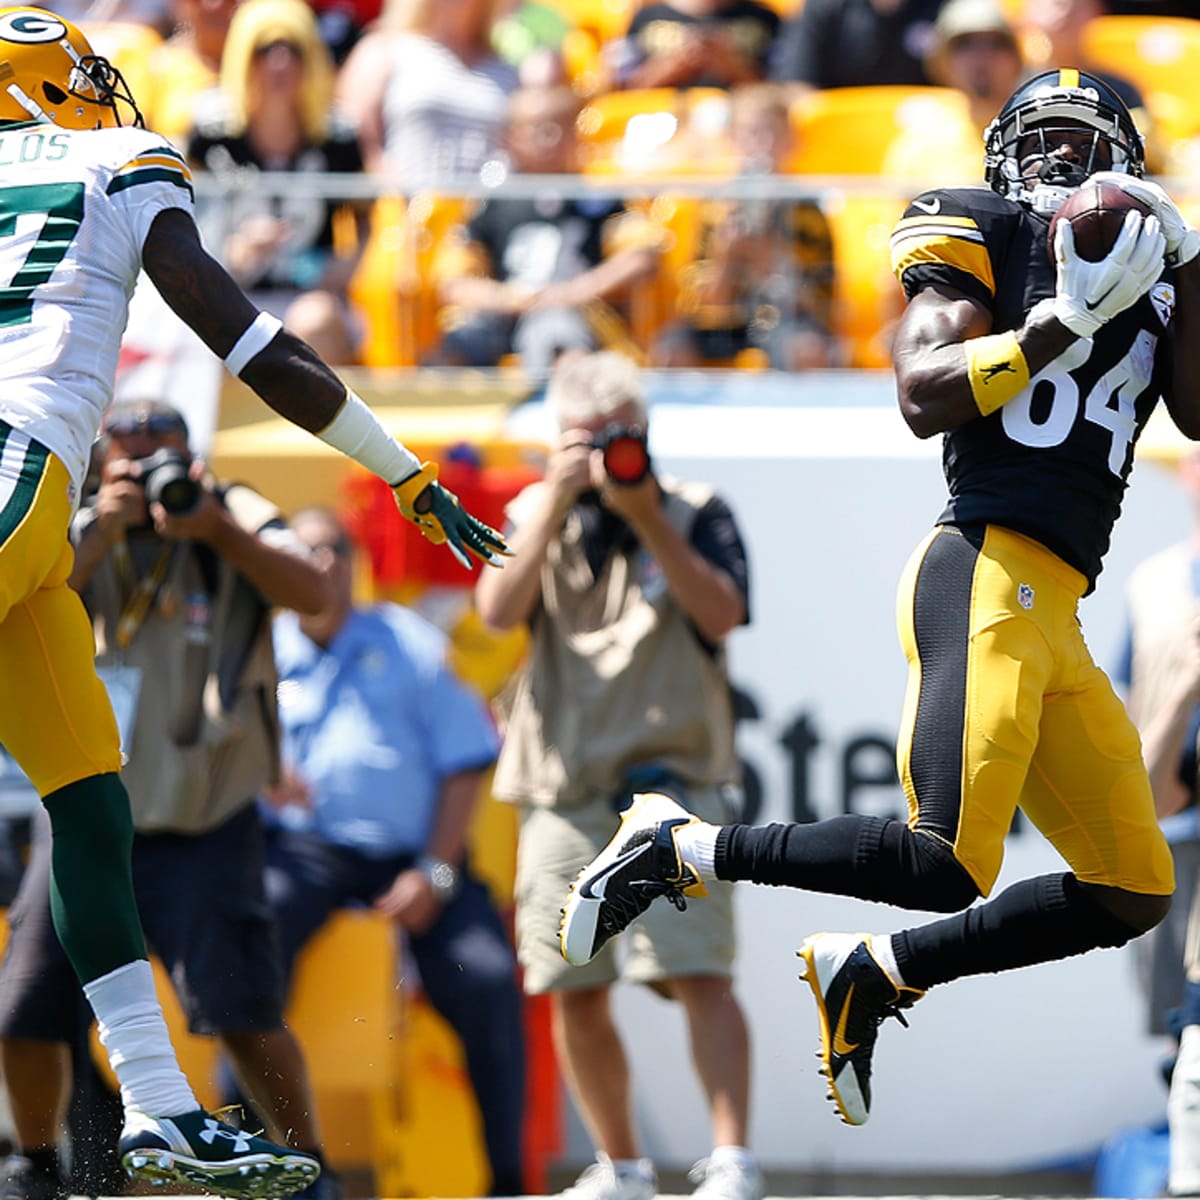 Steelers, Colts pull off upsets, Pats cover vs. Eagles in Colin's